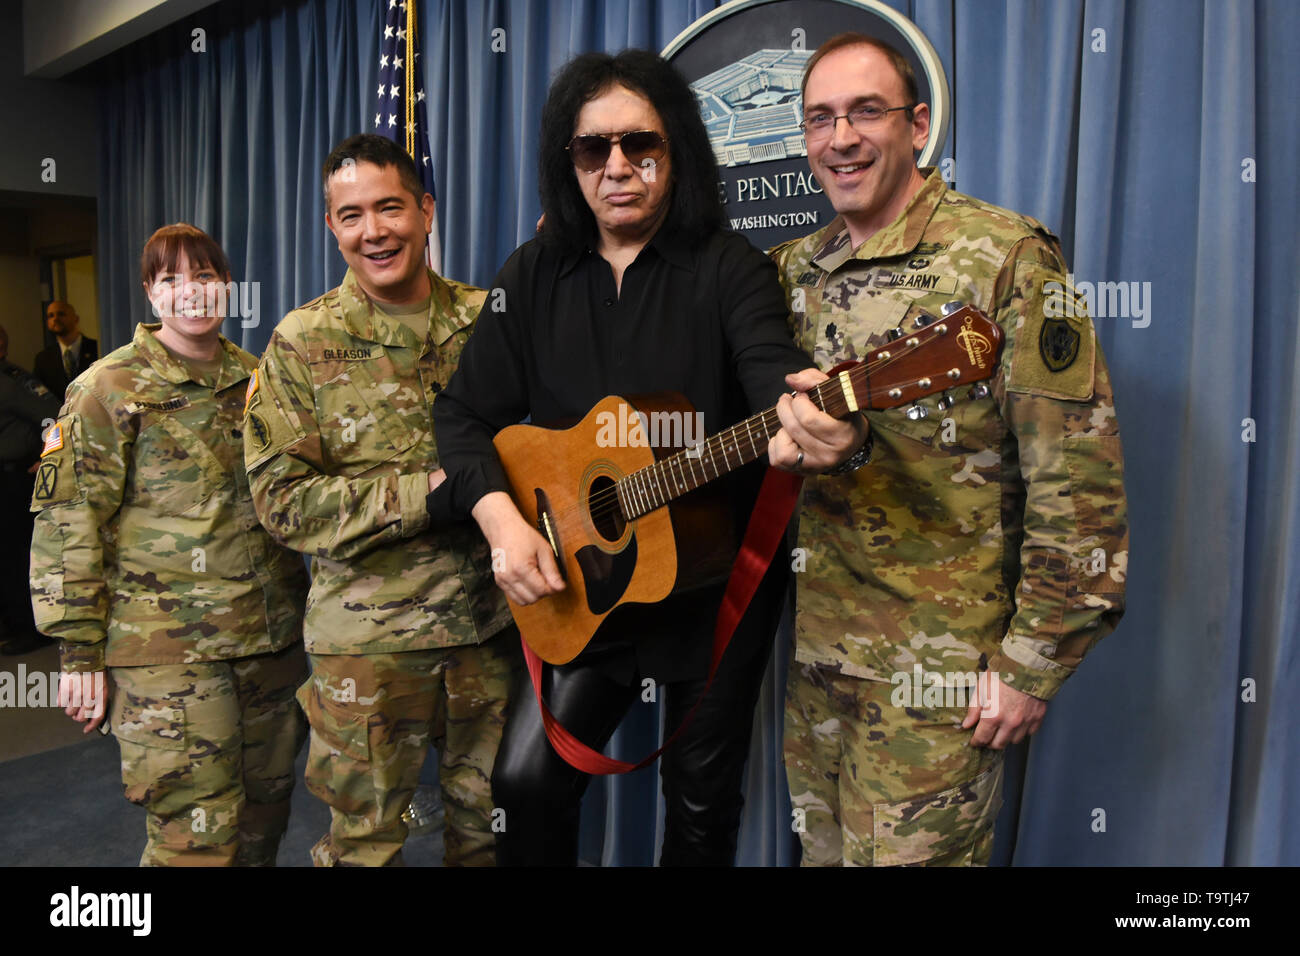 Rock legend Gene Simmons of KISS poses with soldiers during a meet-and-greet at the Pentagon May 16, 2019 in Washington, D.C. Stock Photo